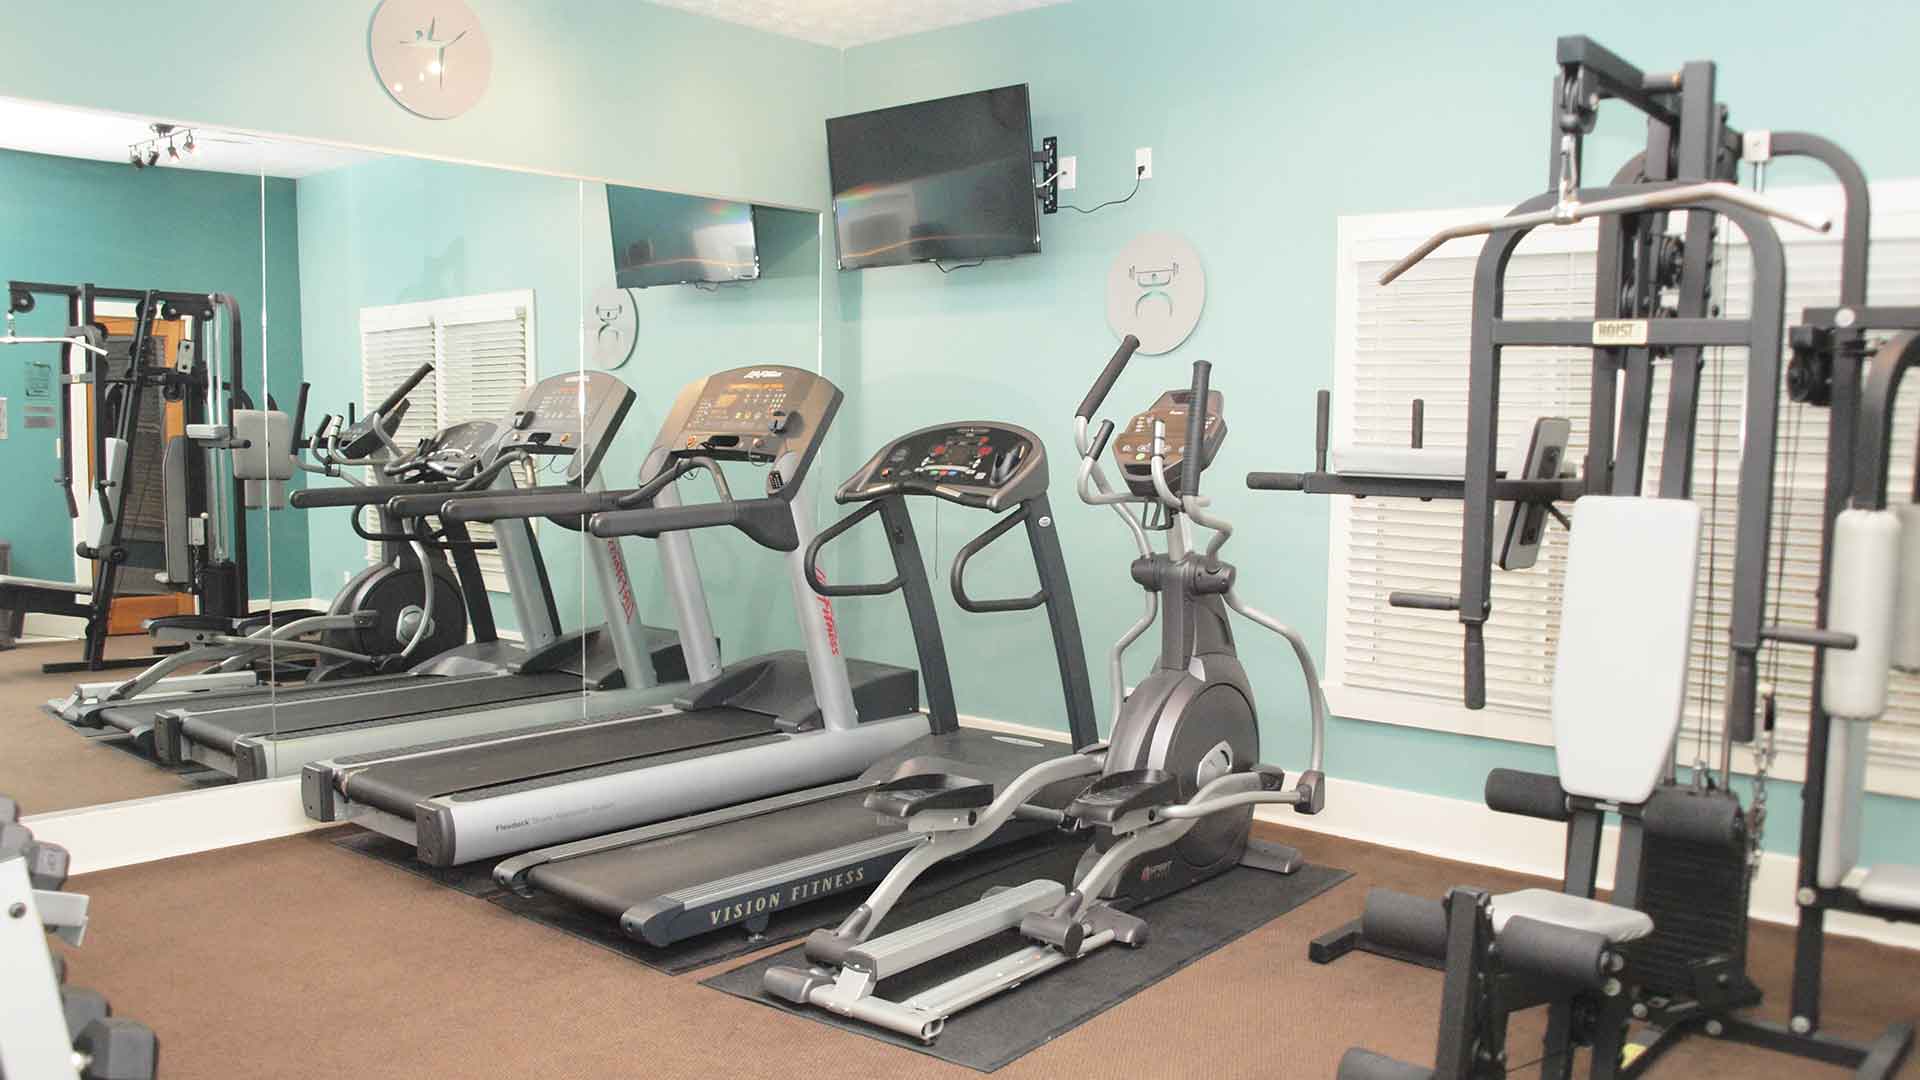 Fitness center with machines at Fox Chase South.